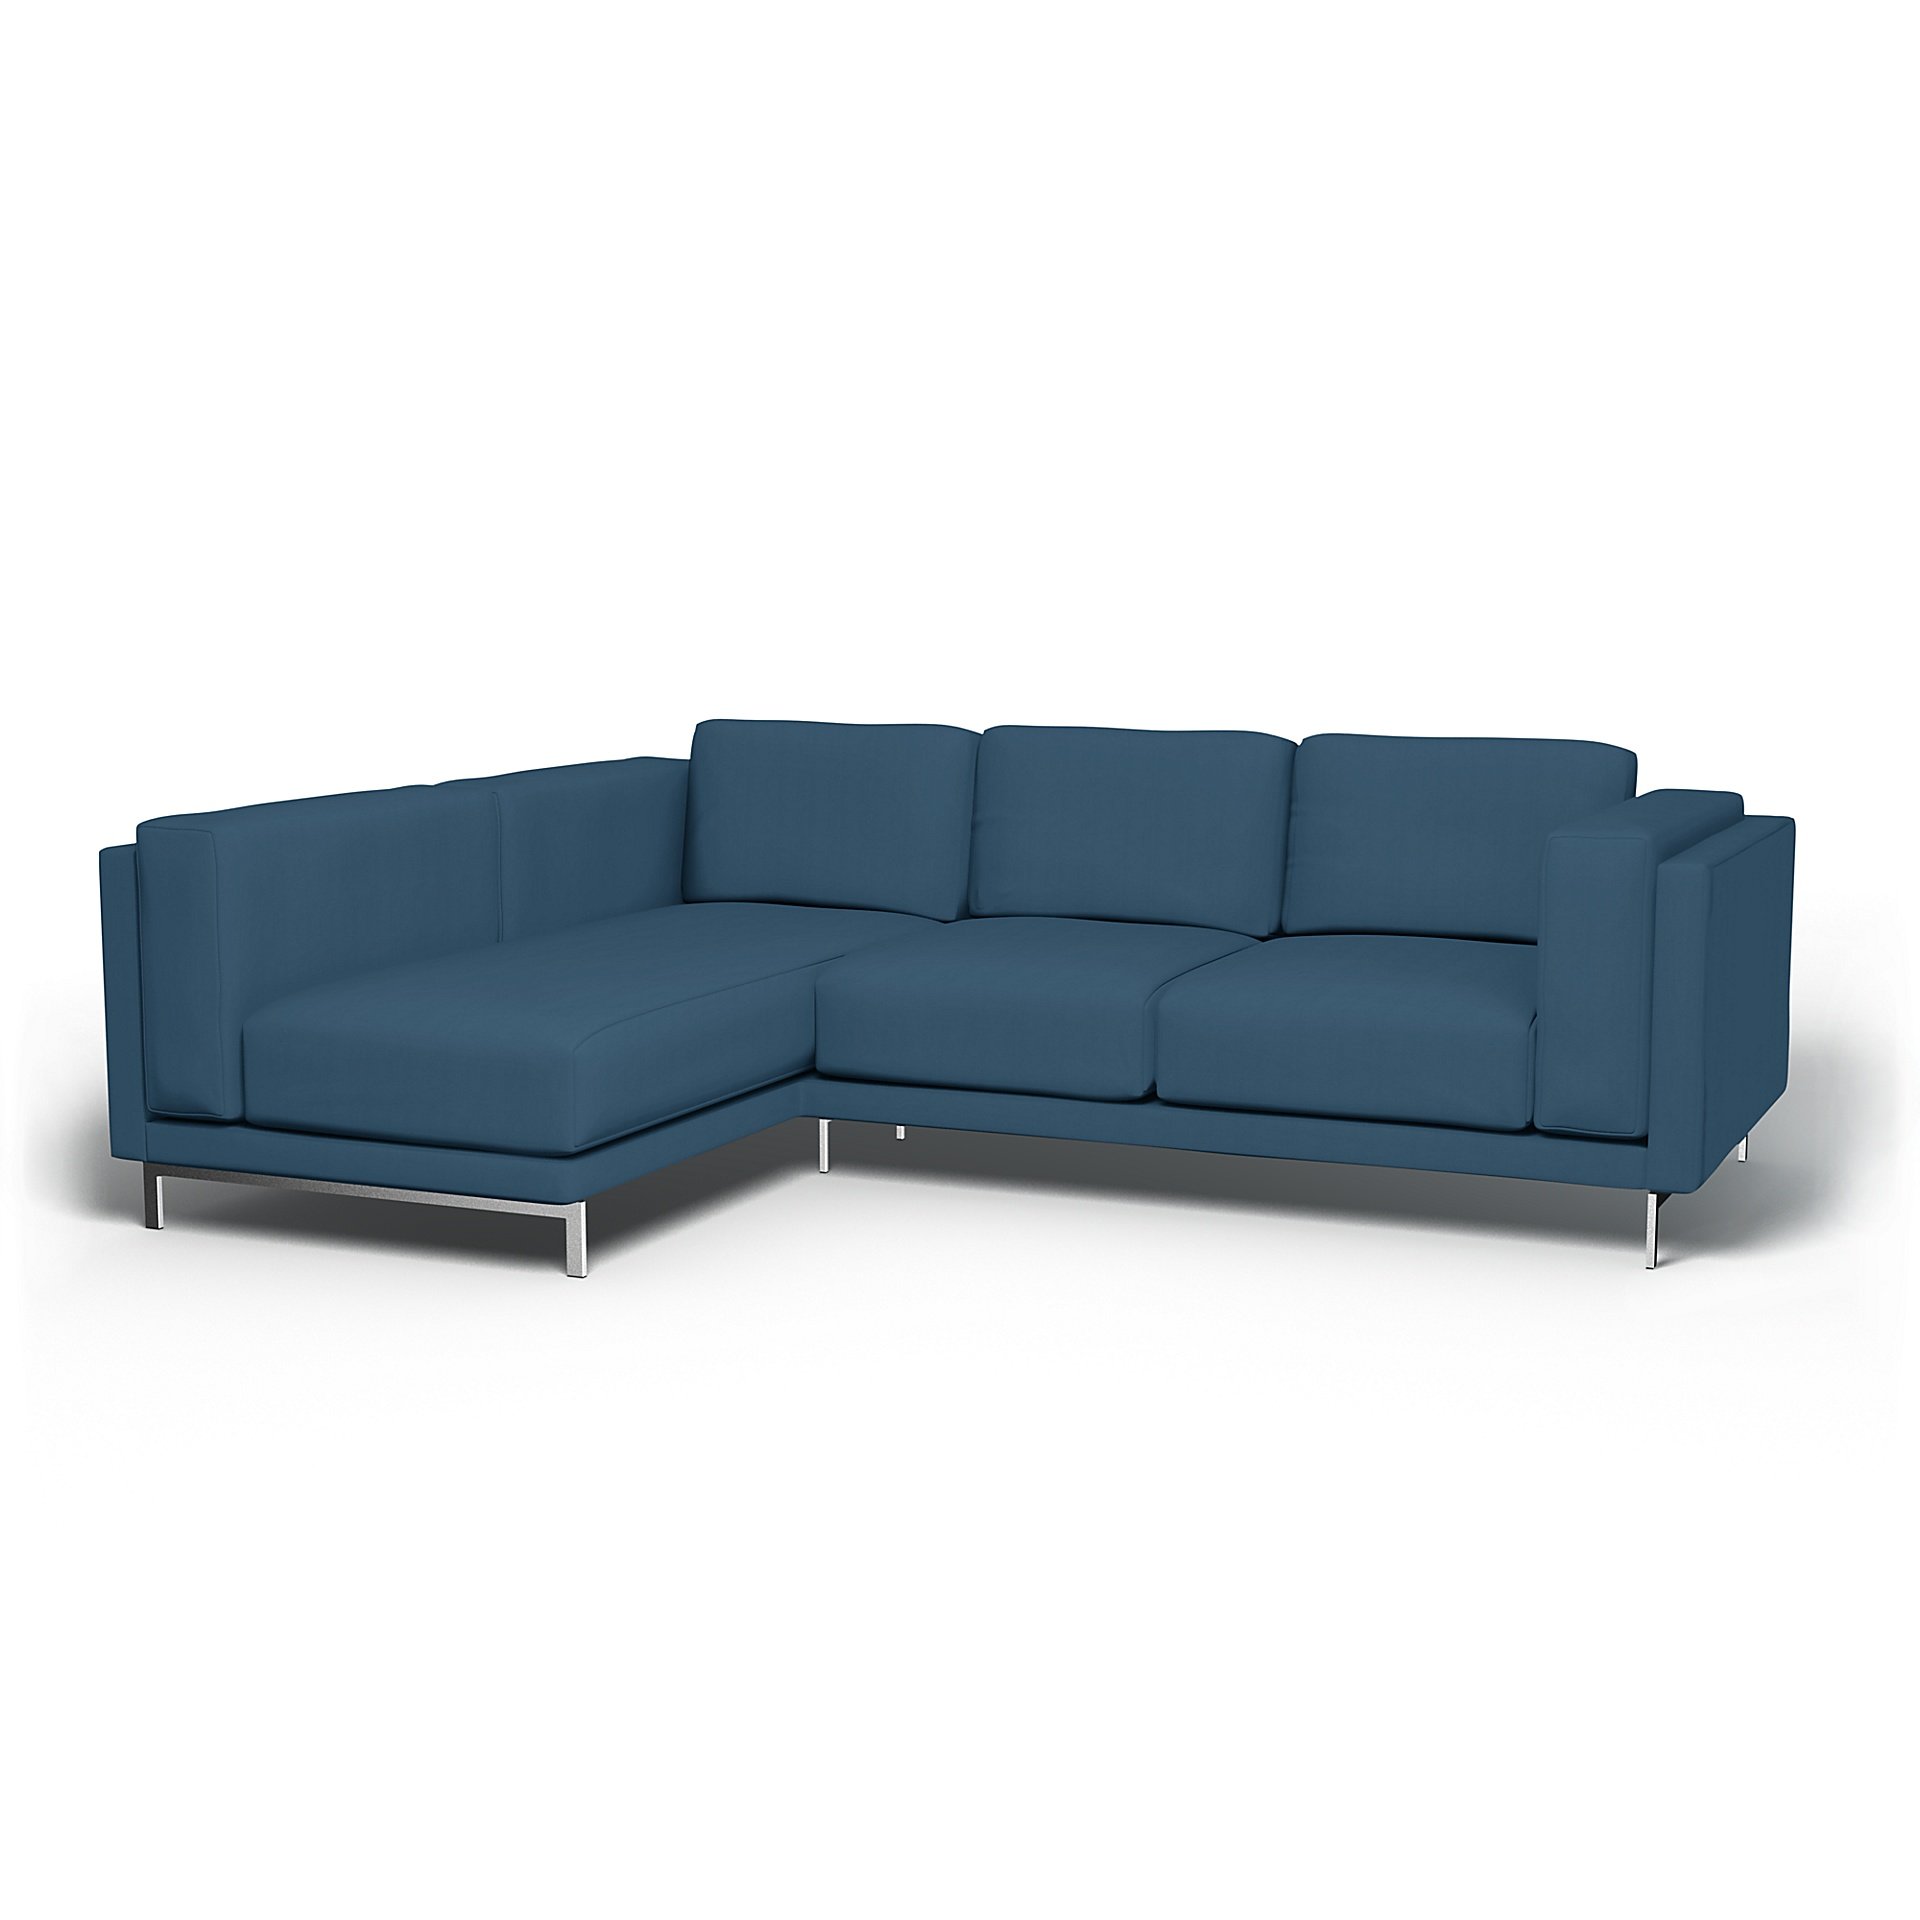 IKEA - Nockeby 3 Seater Sofa with Left Chaise Cover, Real Teal, Cotton - Bemz